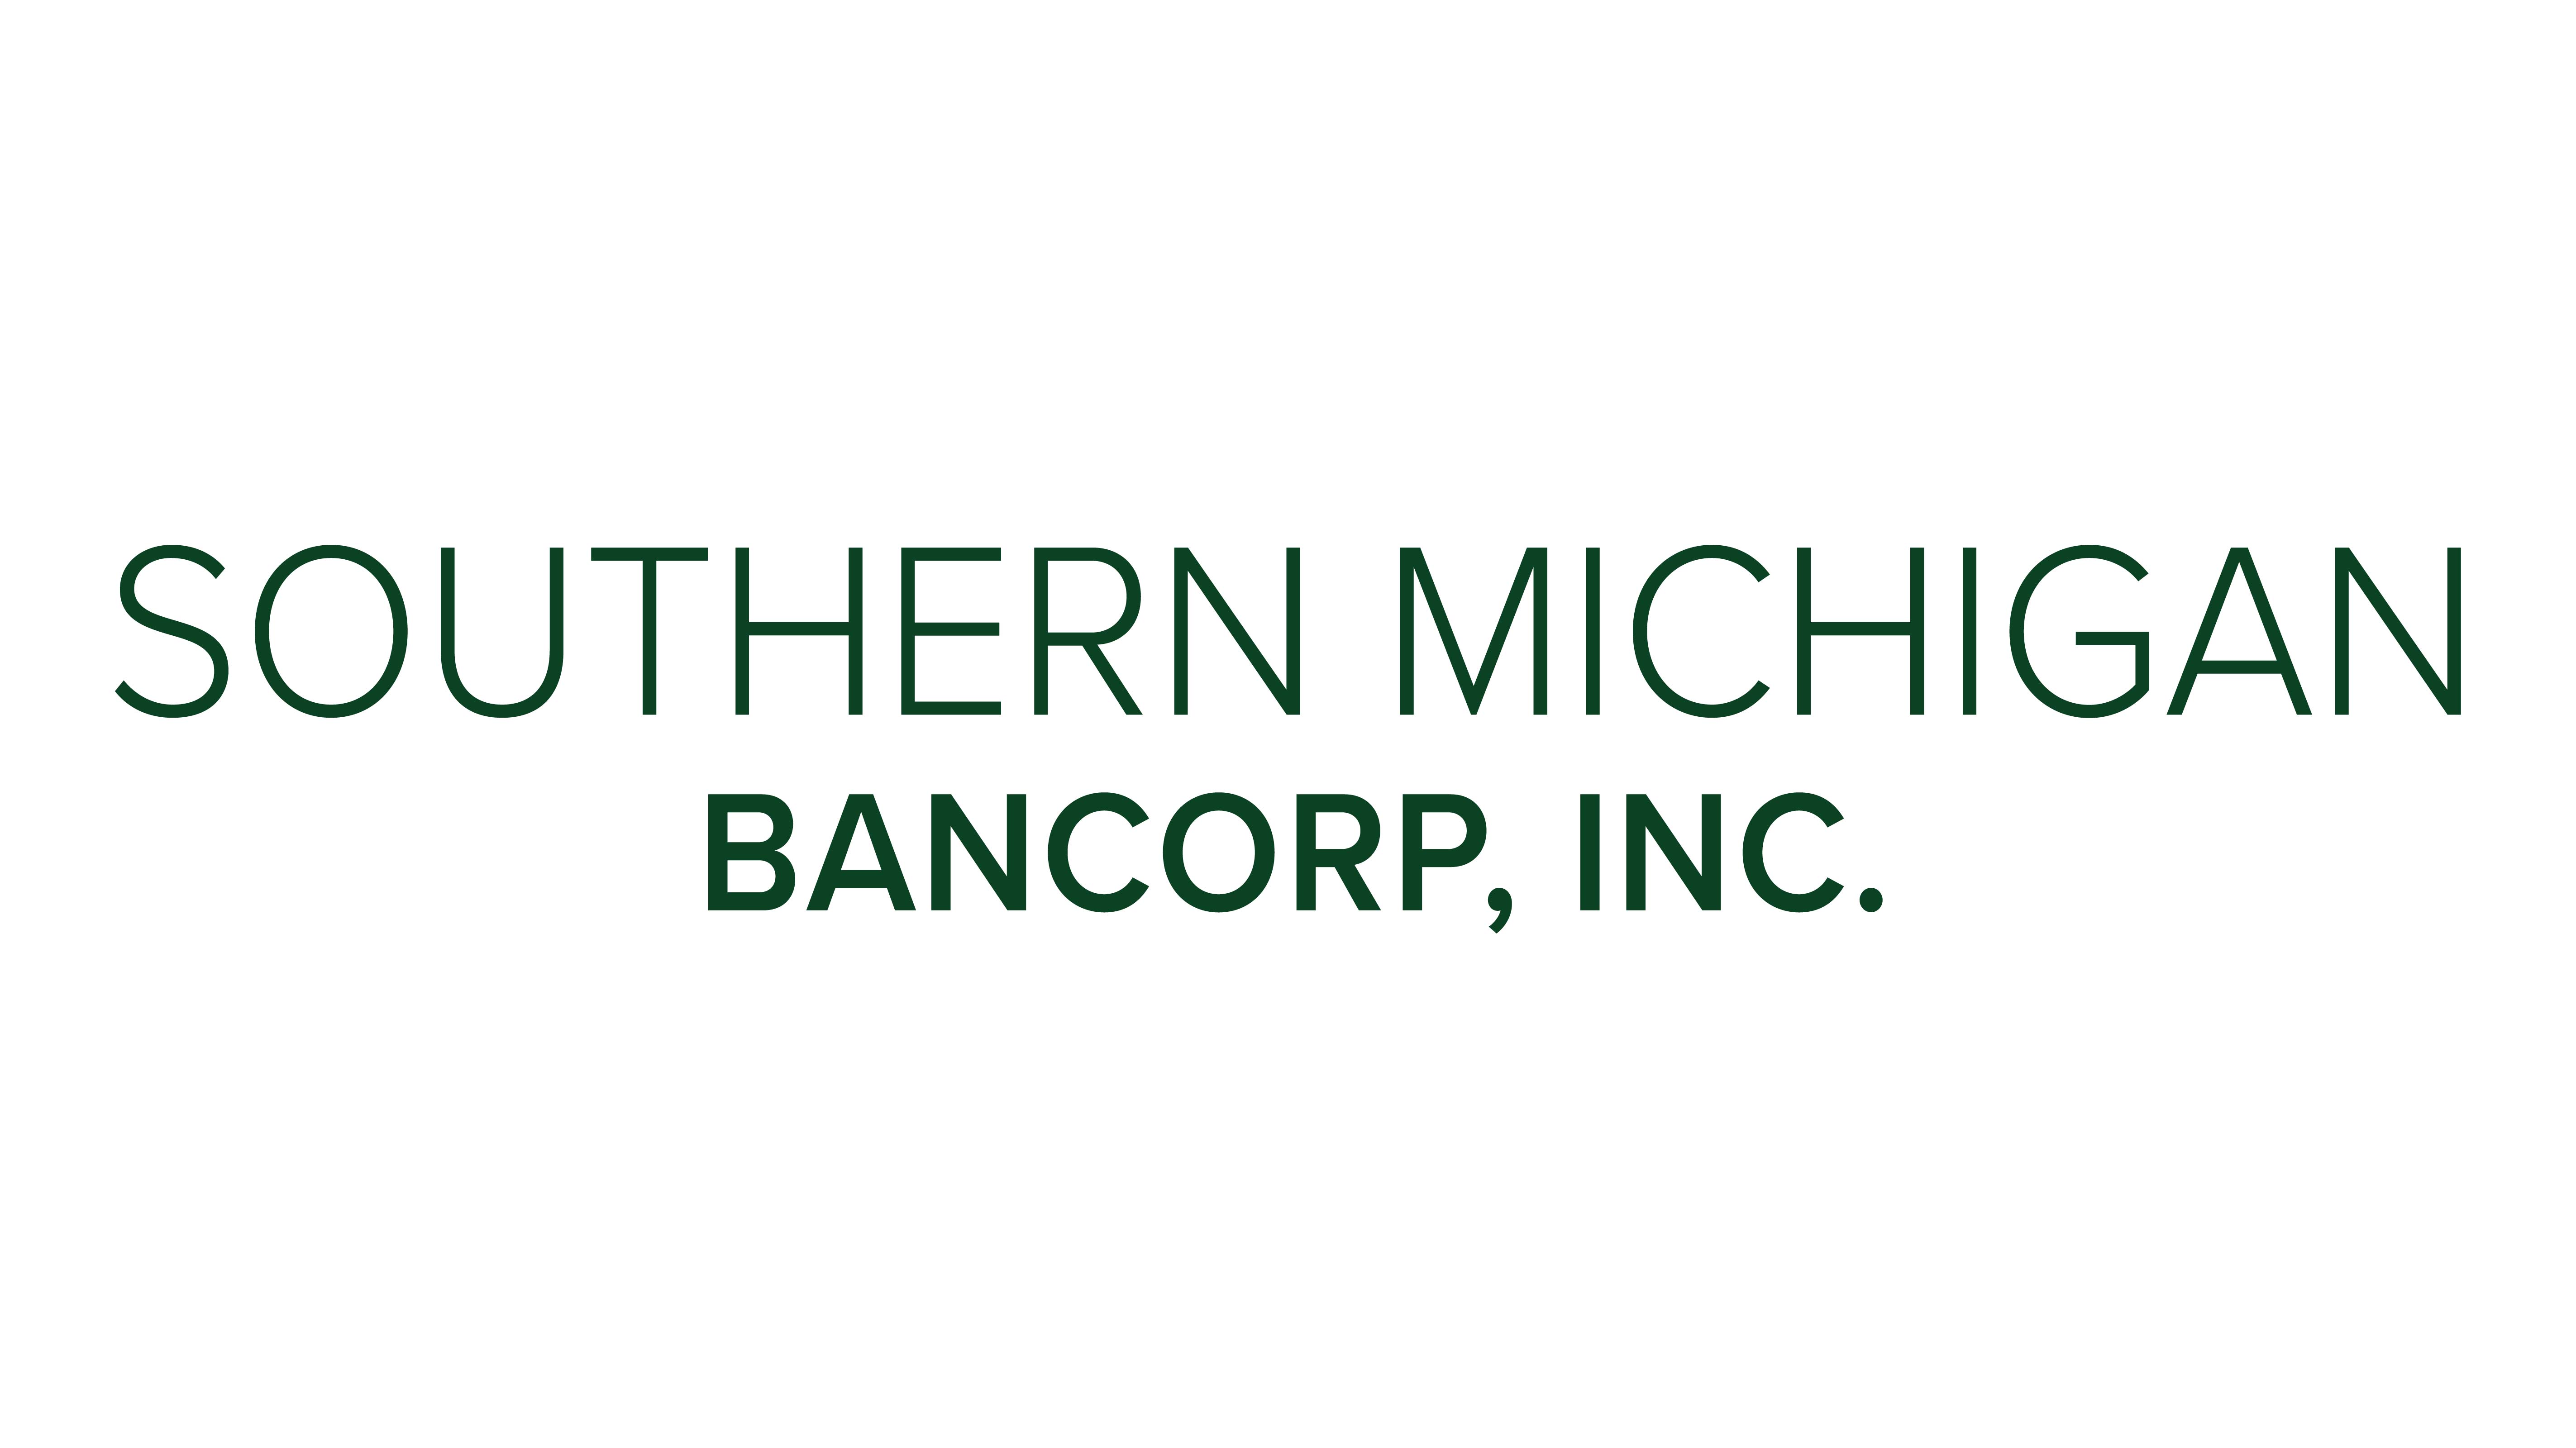 Southern Michigan Bancorp, Inc. Announces Increase in